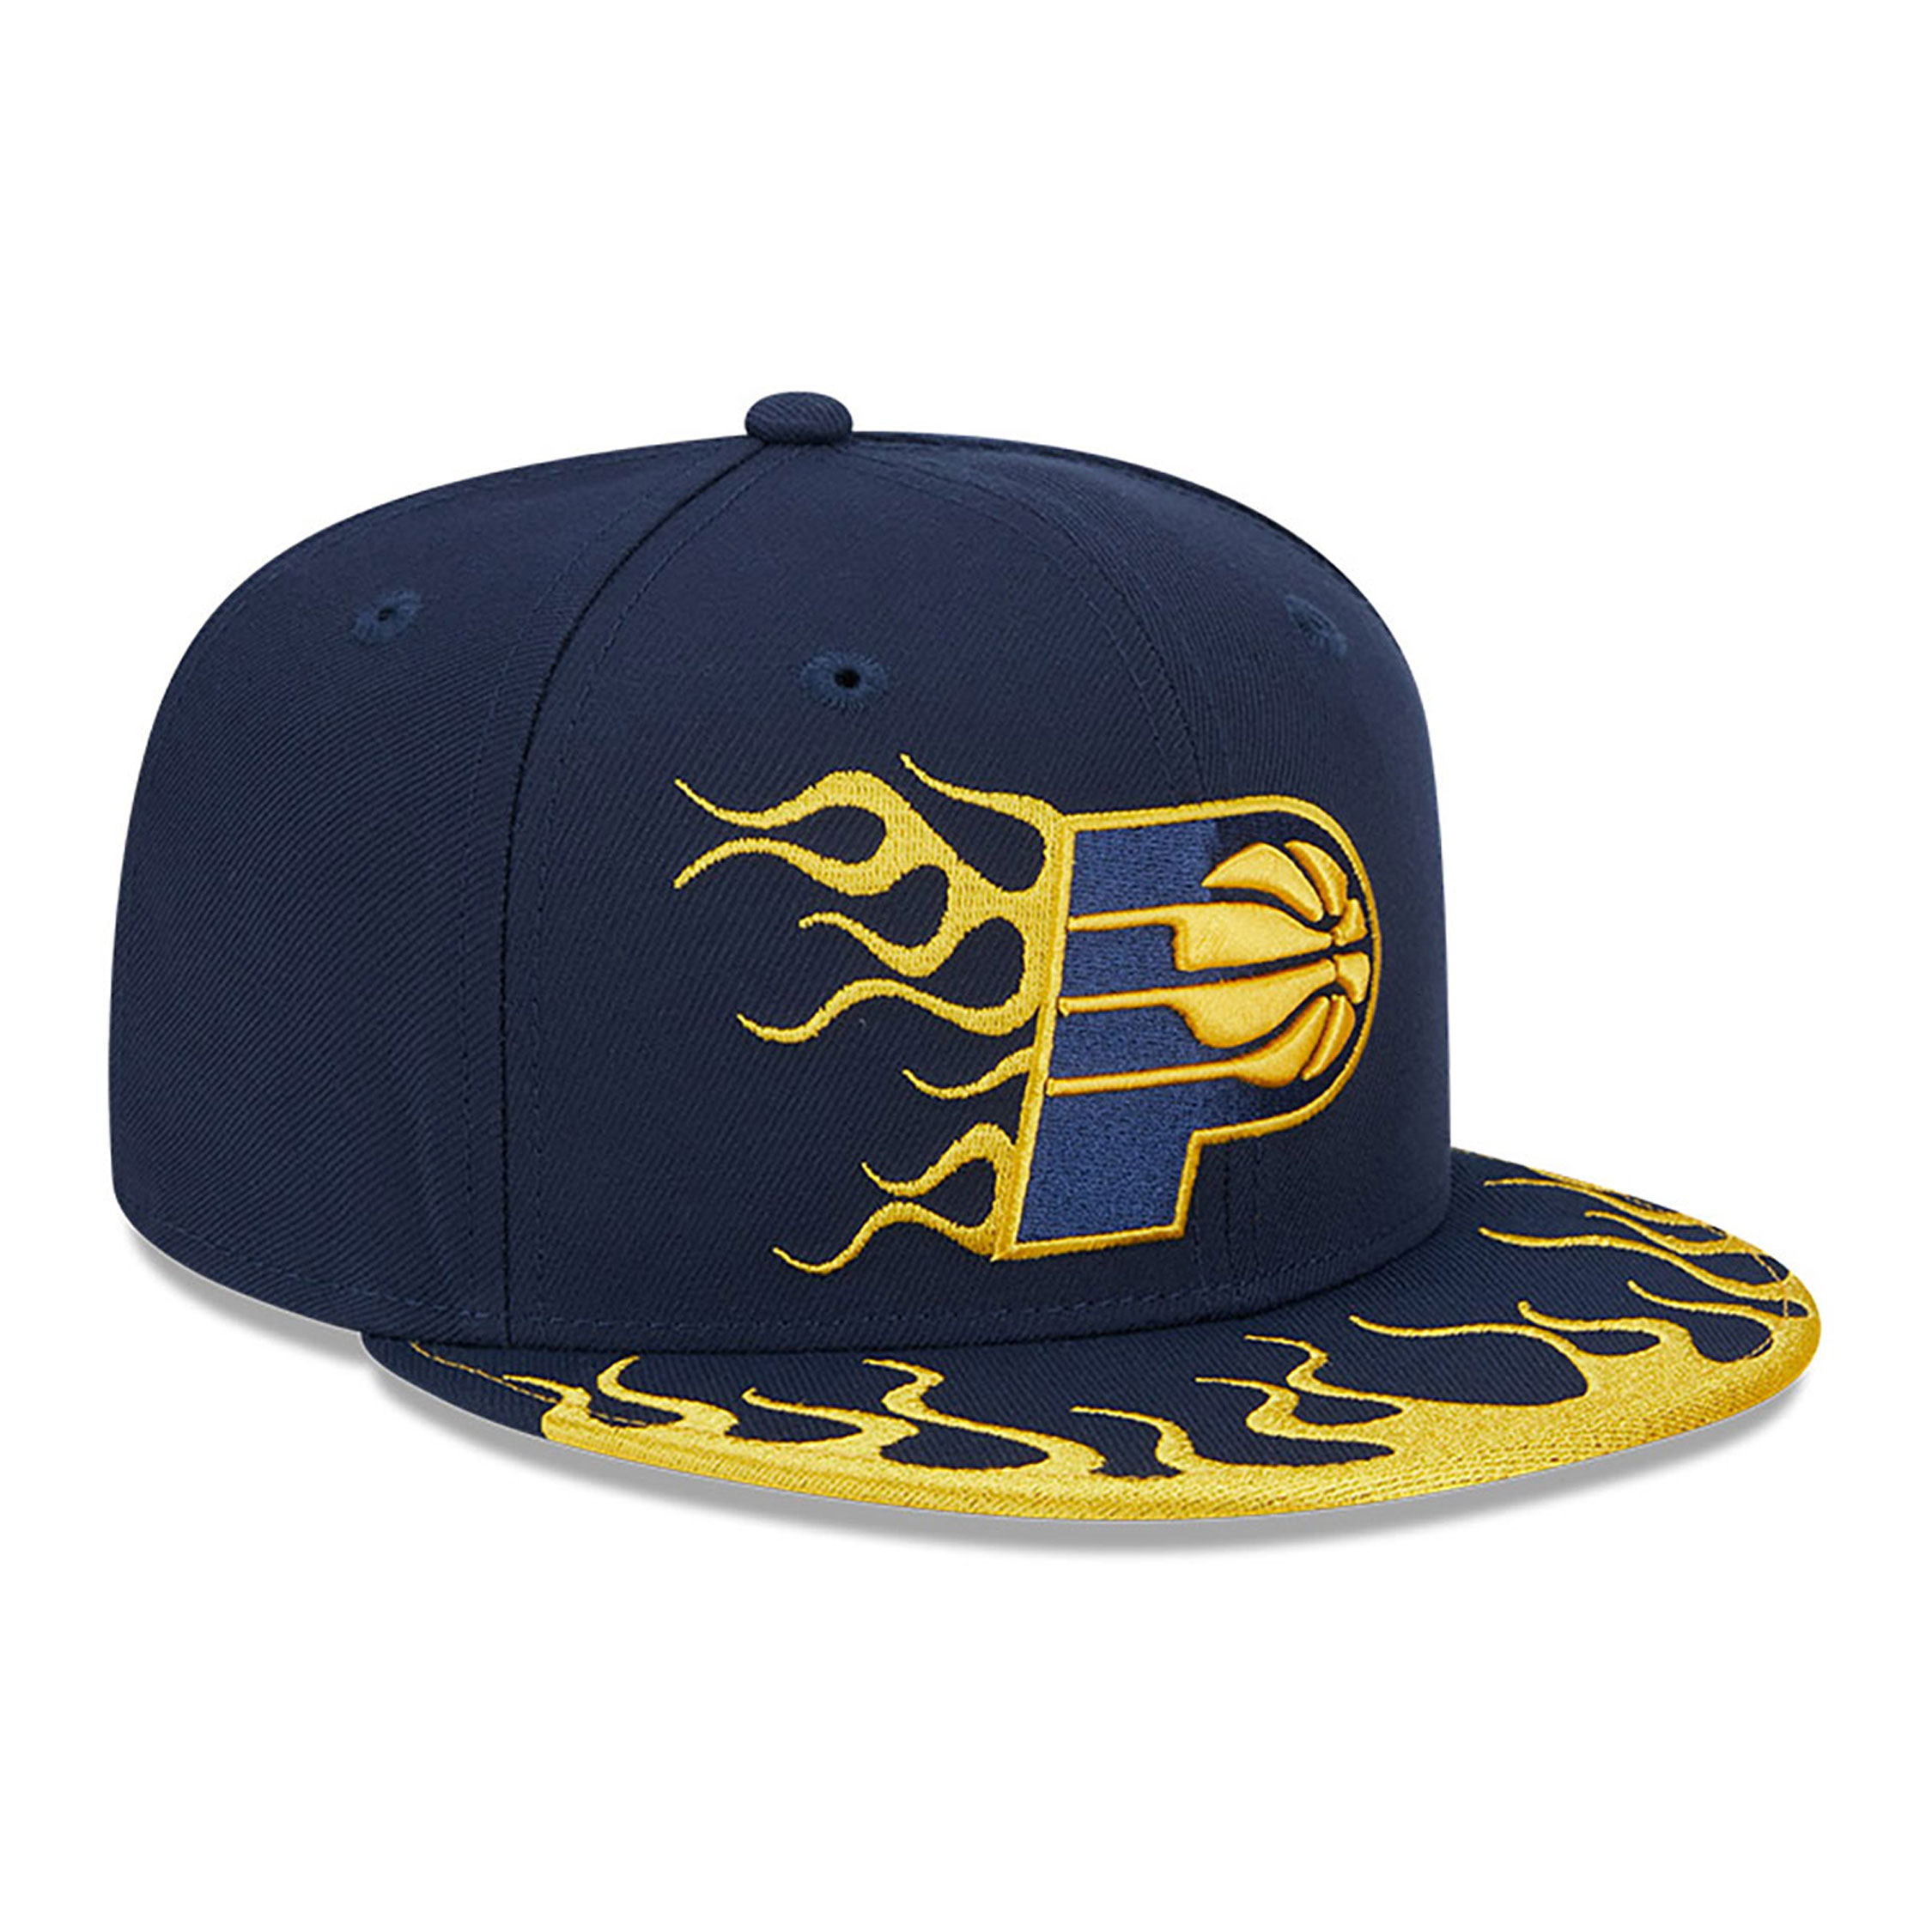 Indiana Pacers NBA Rally Drive Navy 9FIFTY Snapback Cap